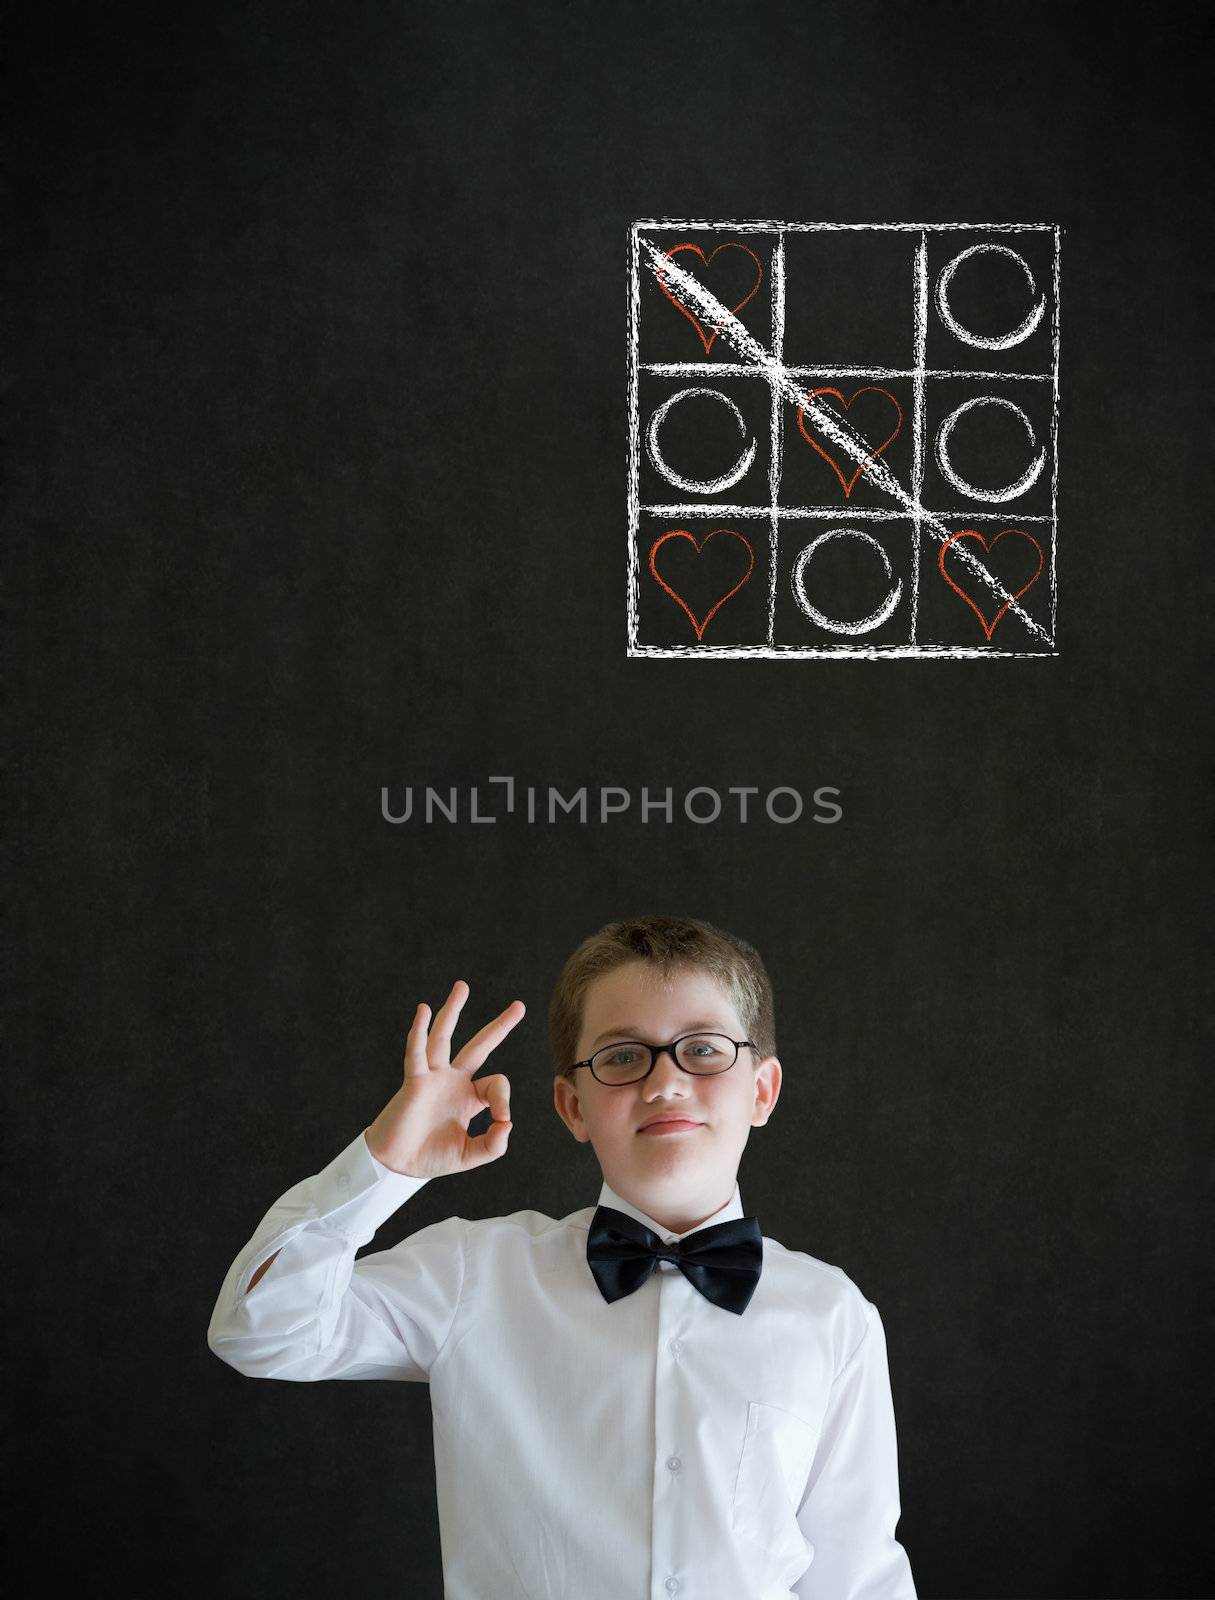 All ok or okay sign boy dressed up as business man with chalk tic tac toe love valentine concept on blackboard background